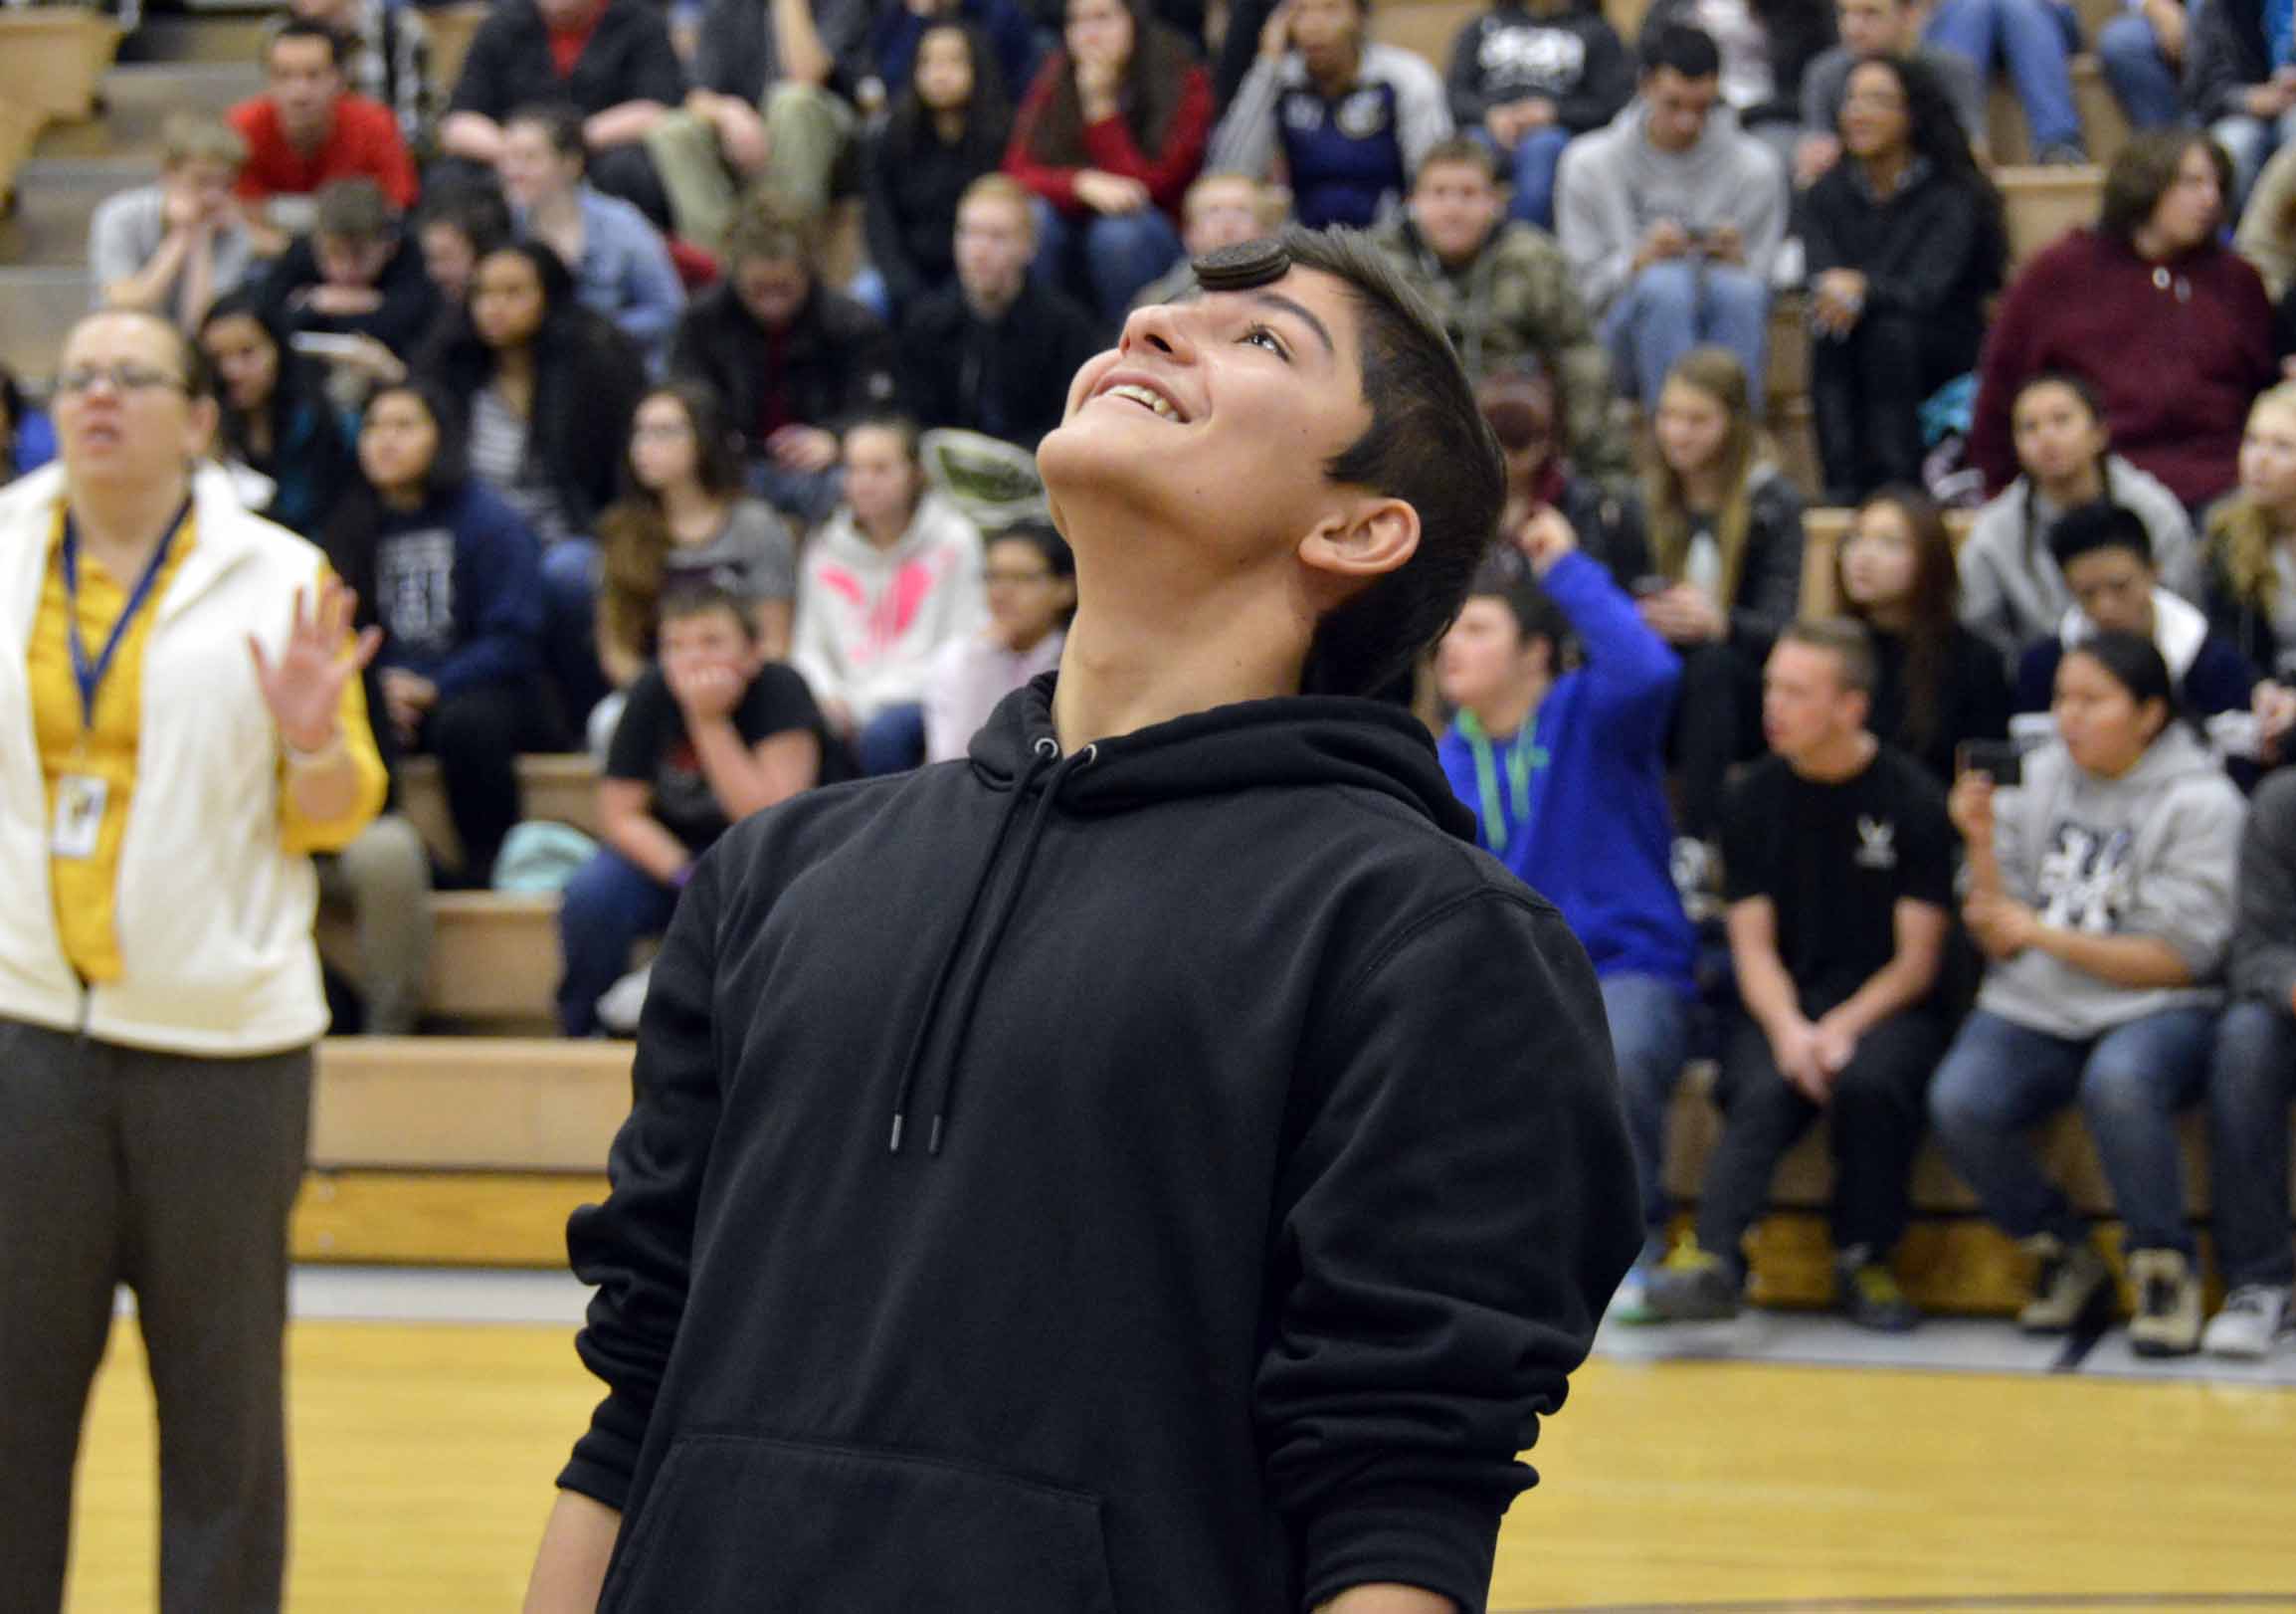 Photos: Hunter High students compete to win car donated by teacher